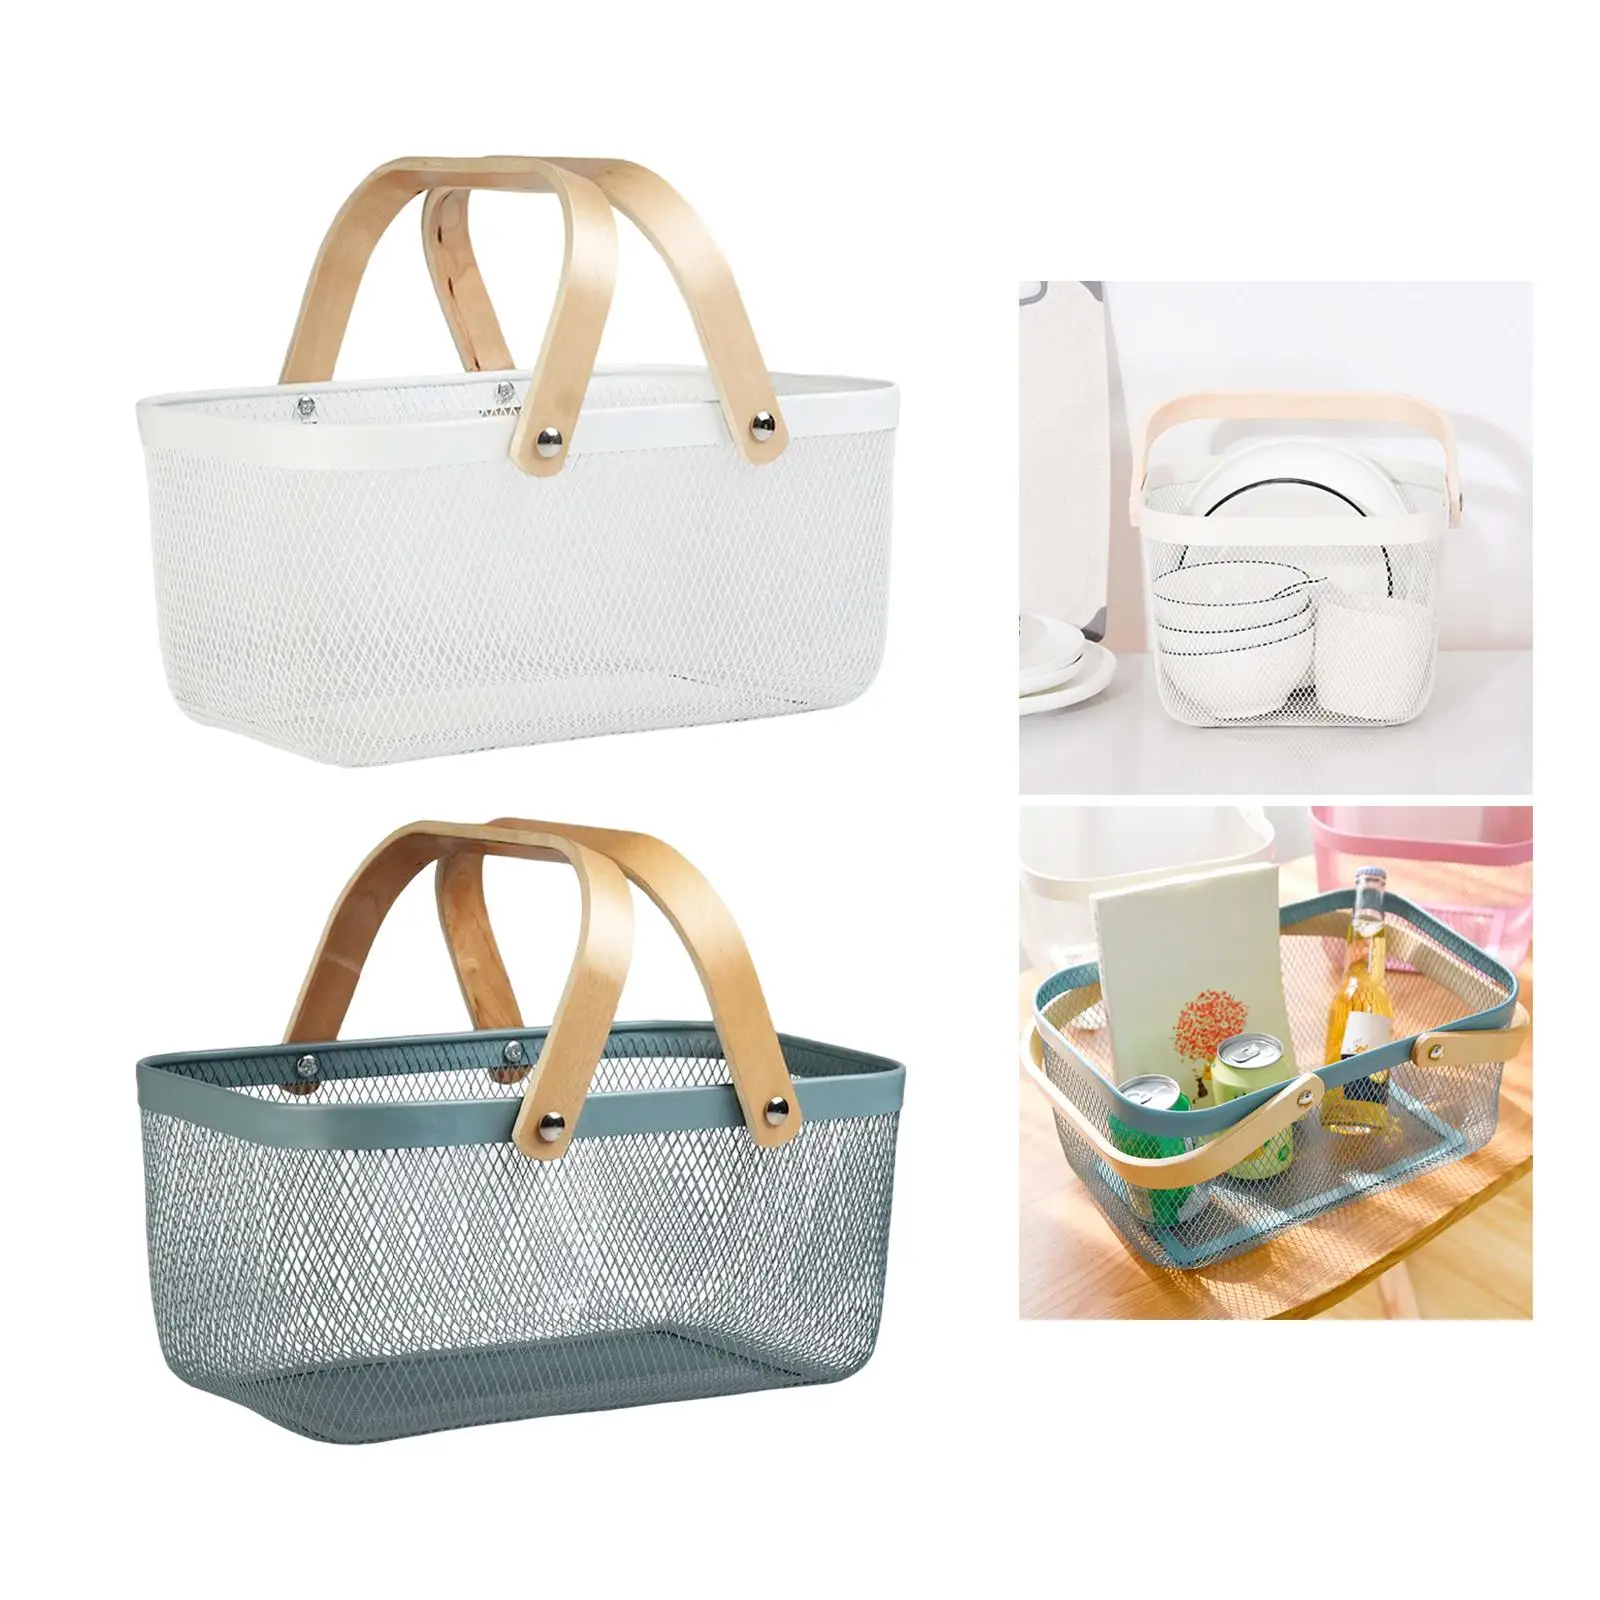 Handheld Picnic Storage Basket Large Shopping Basket Metal Outdoor Food Container for Outing Camping Hiking Snacks Bread